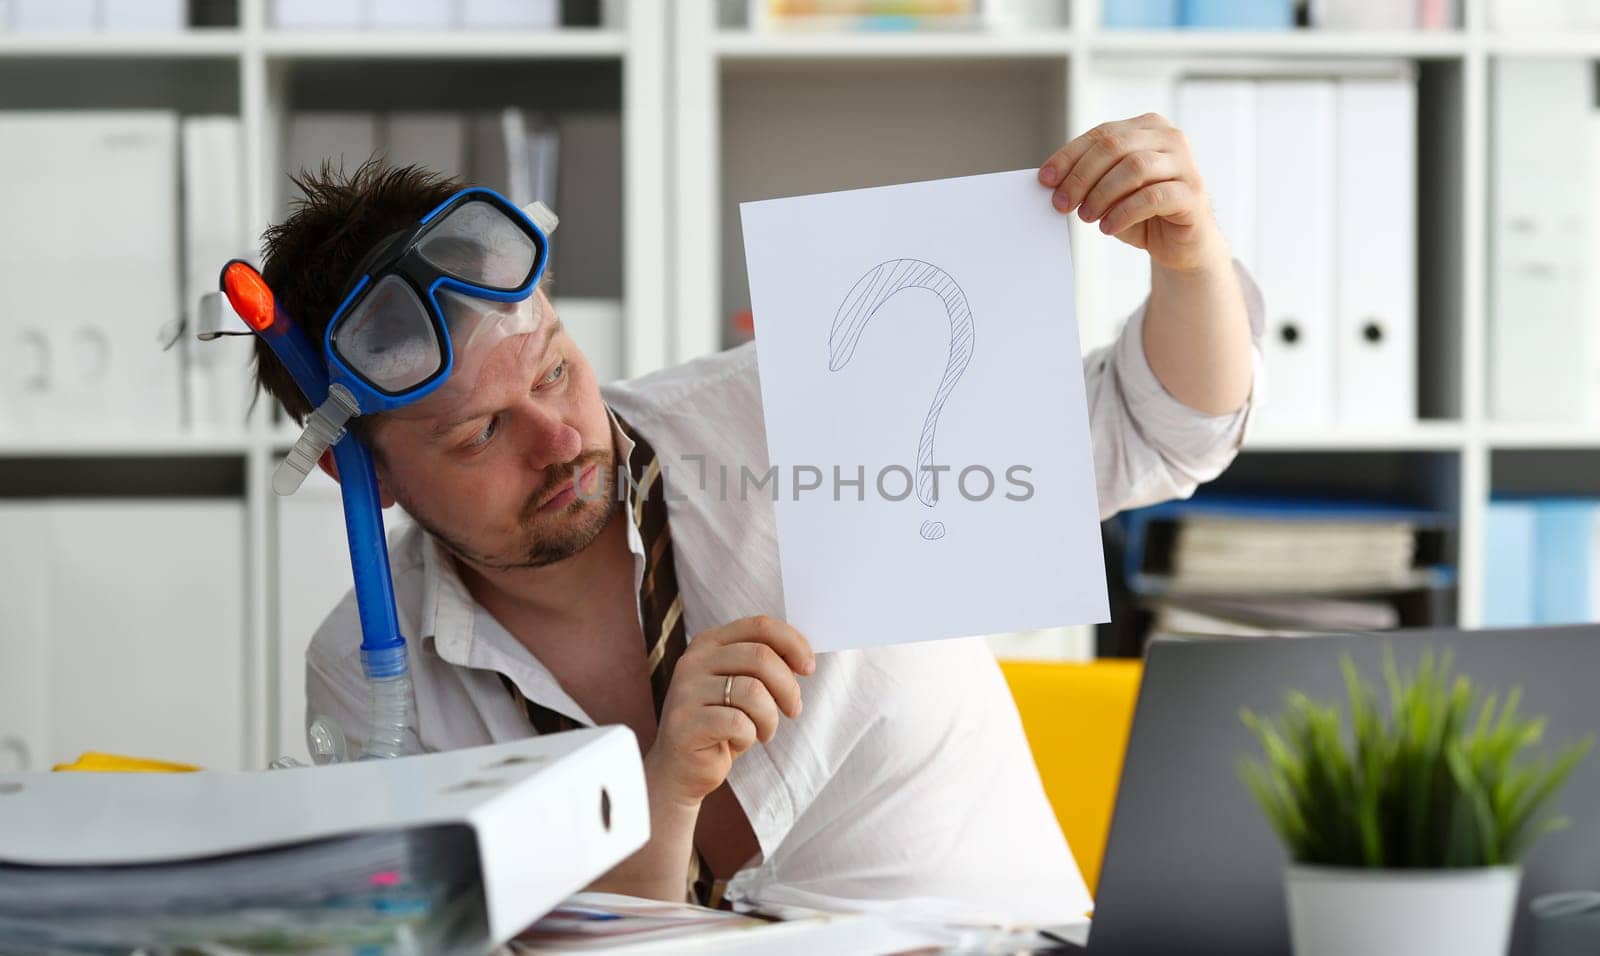 Man wearing suit and tie in goggles and snorkel hold in arm paper with big question sign at workplace in office portrait. Count days to leave annual day off workaholic tourism resort idea ticket sale